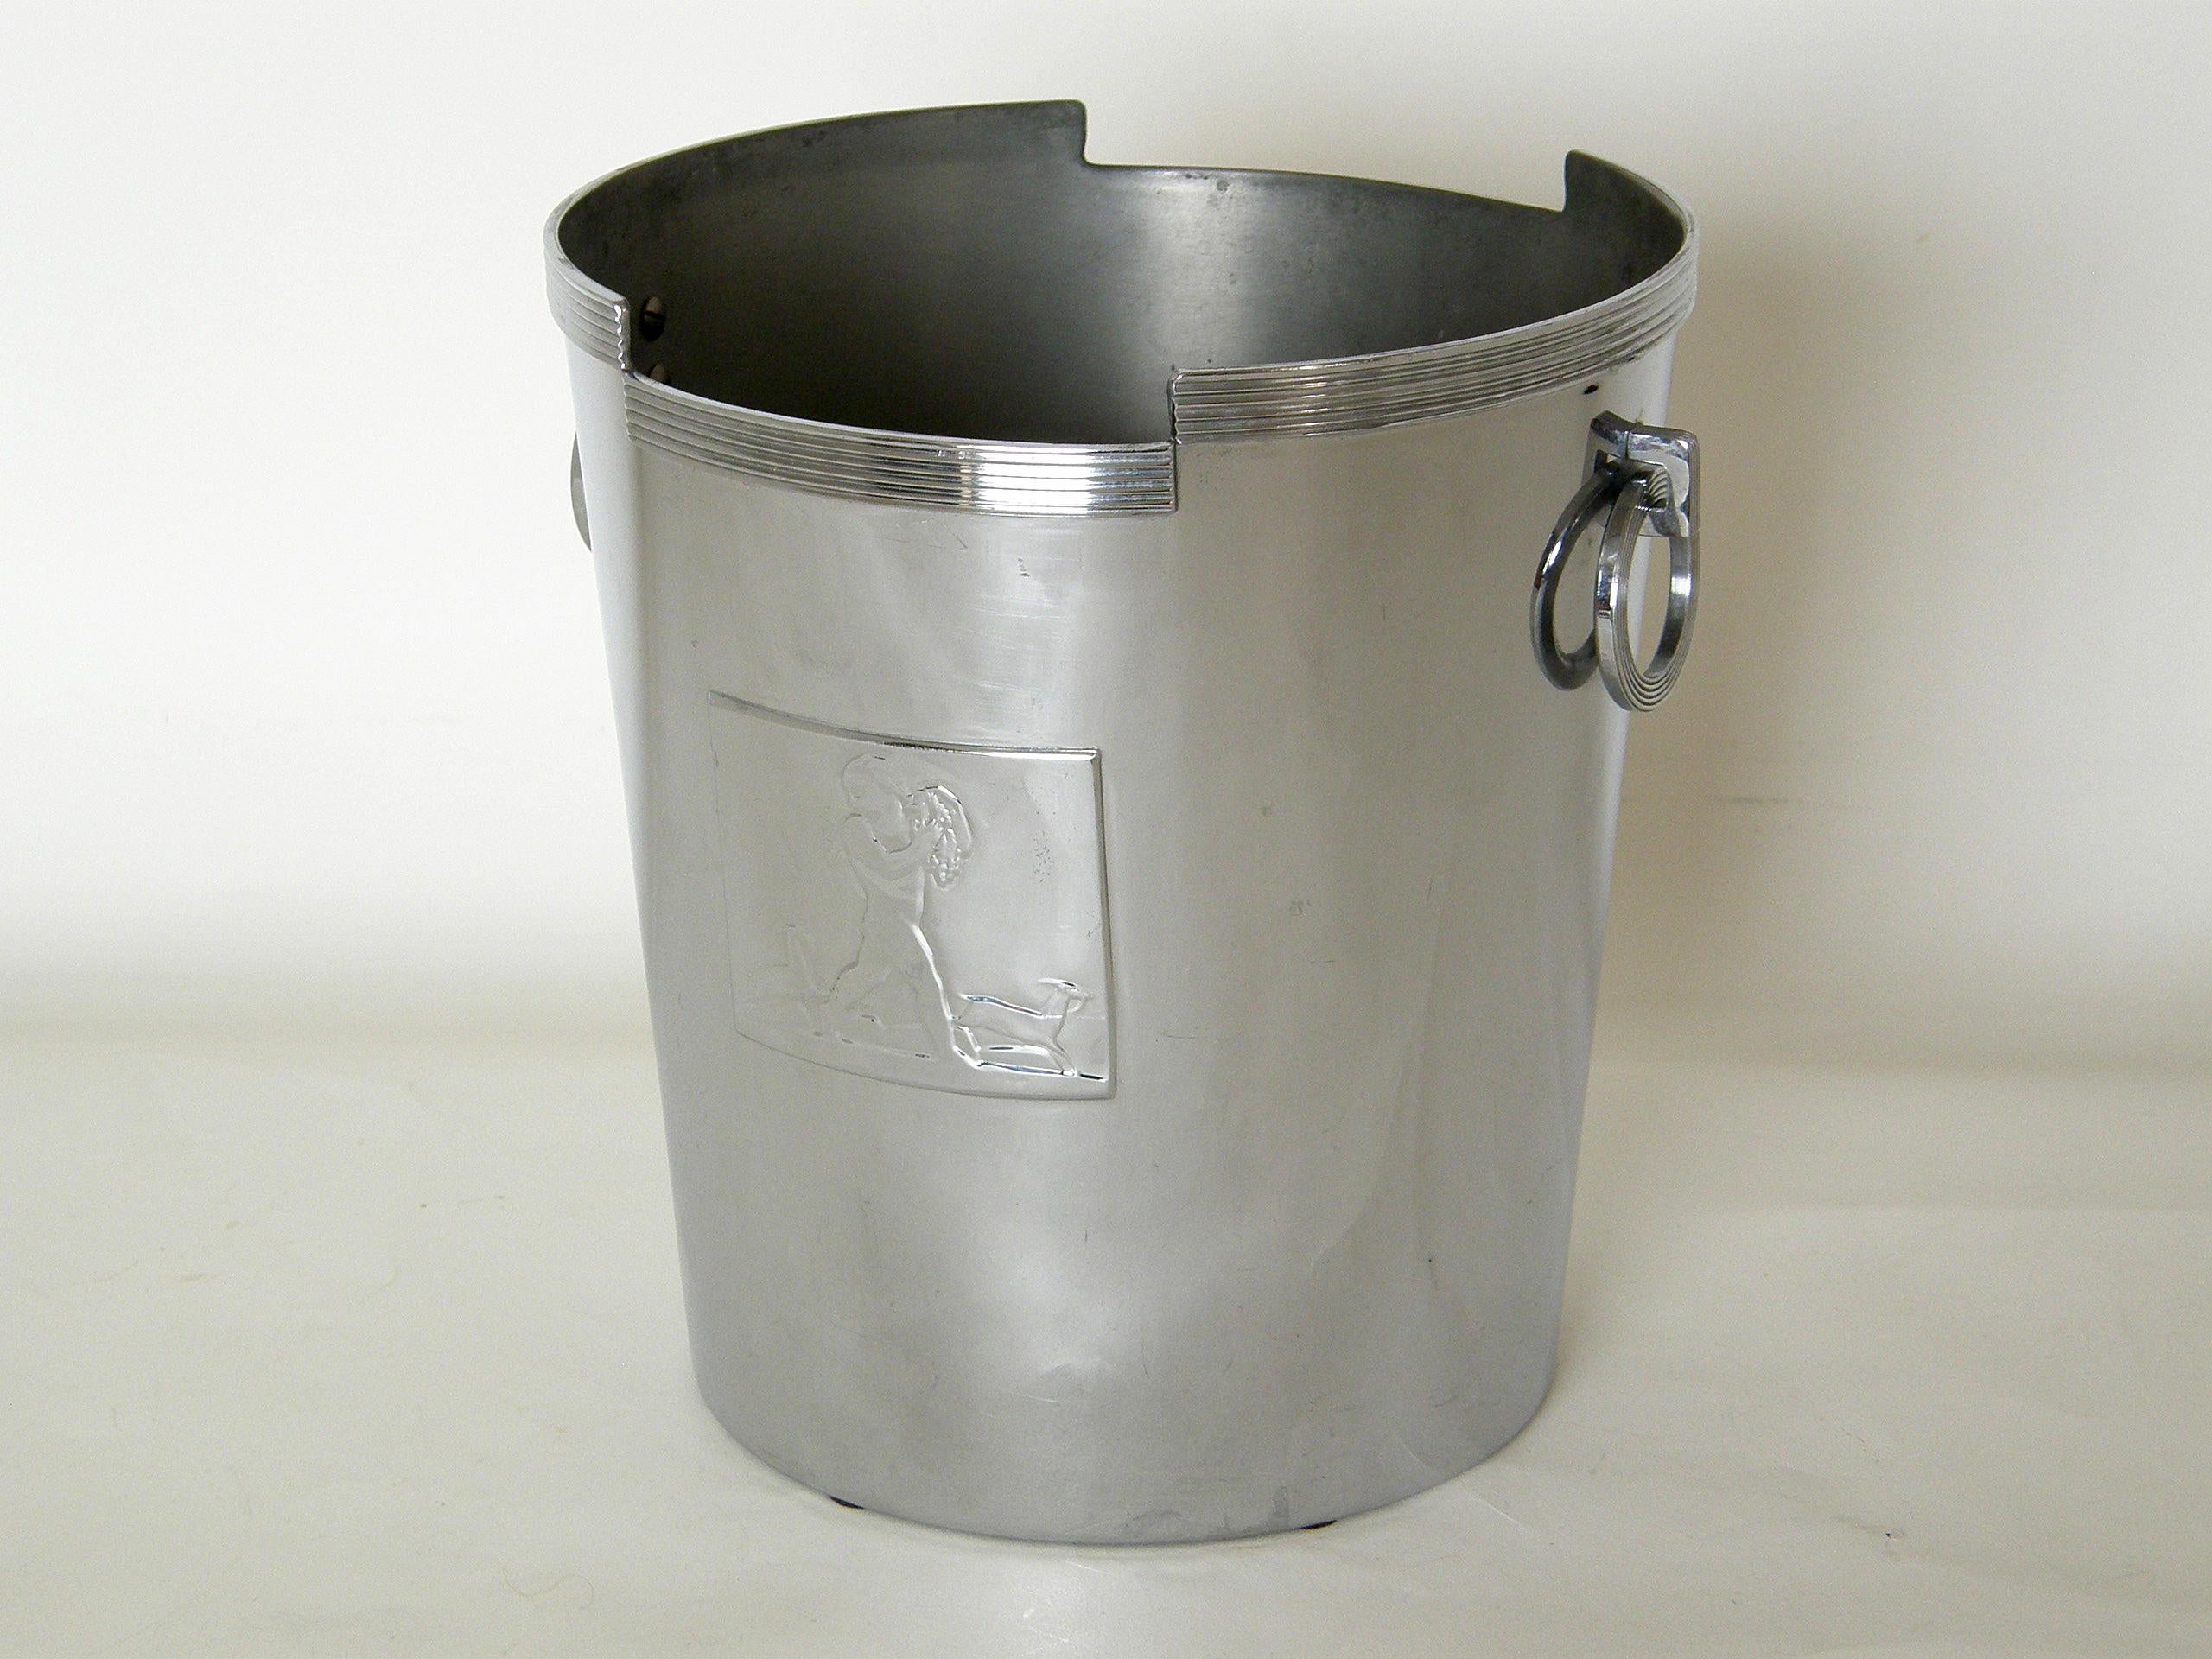 This chrome-plated champagne bucket has a Classic Art Deco style. The top edge is stepped and trimmed with a ribbed band; the front is adorned with a decorative plaque depicting Bacchus and two deer; and the ribbed ring handles hang from the sides.